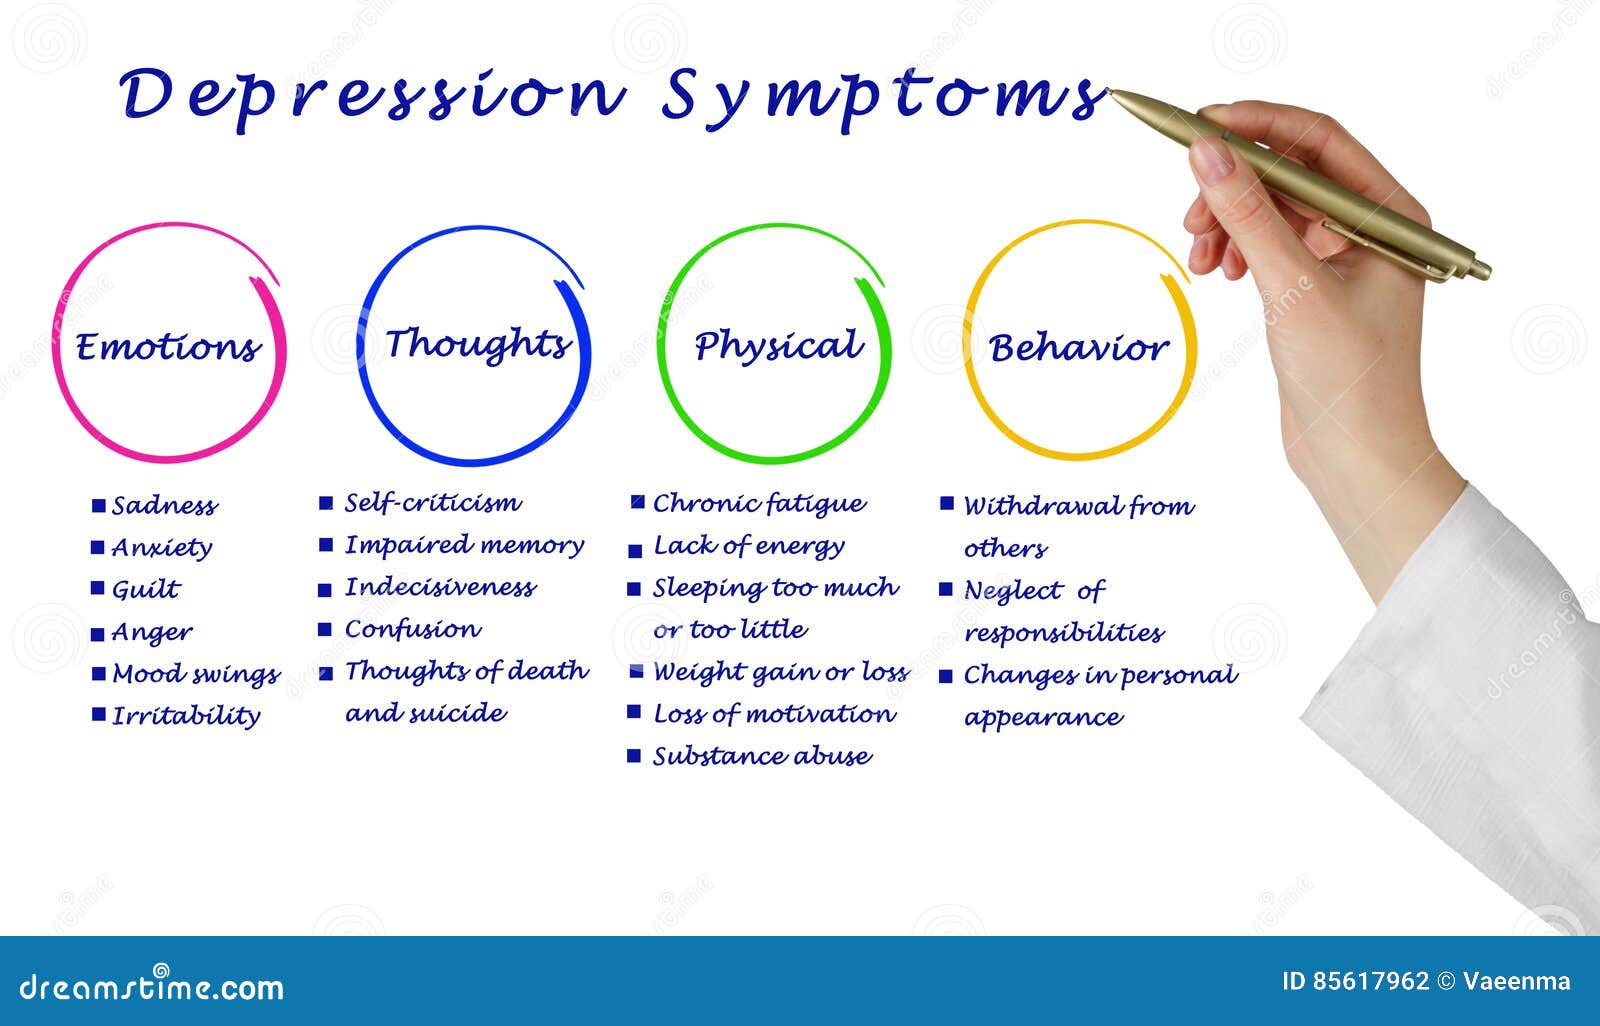 Depression symptoms stock photo. Image of appearance - 85617962